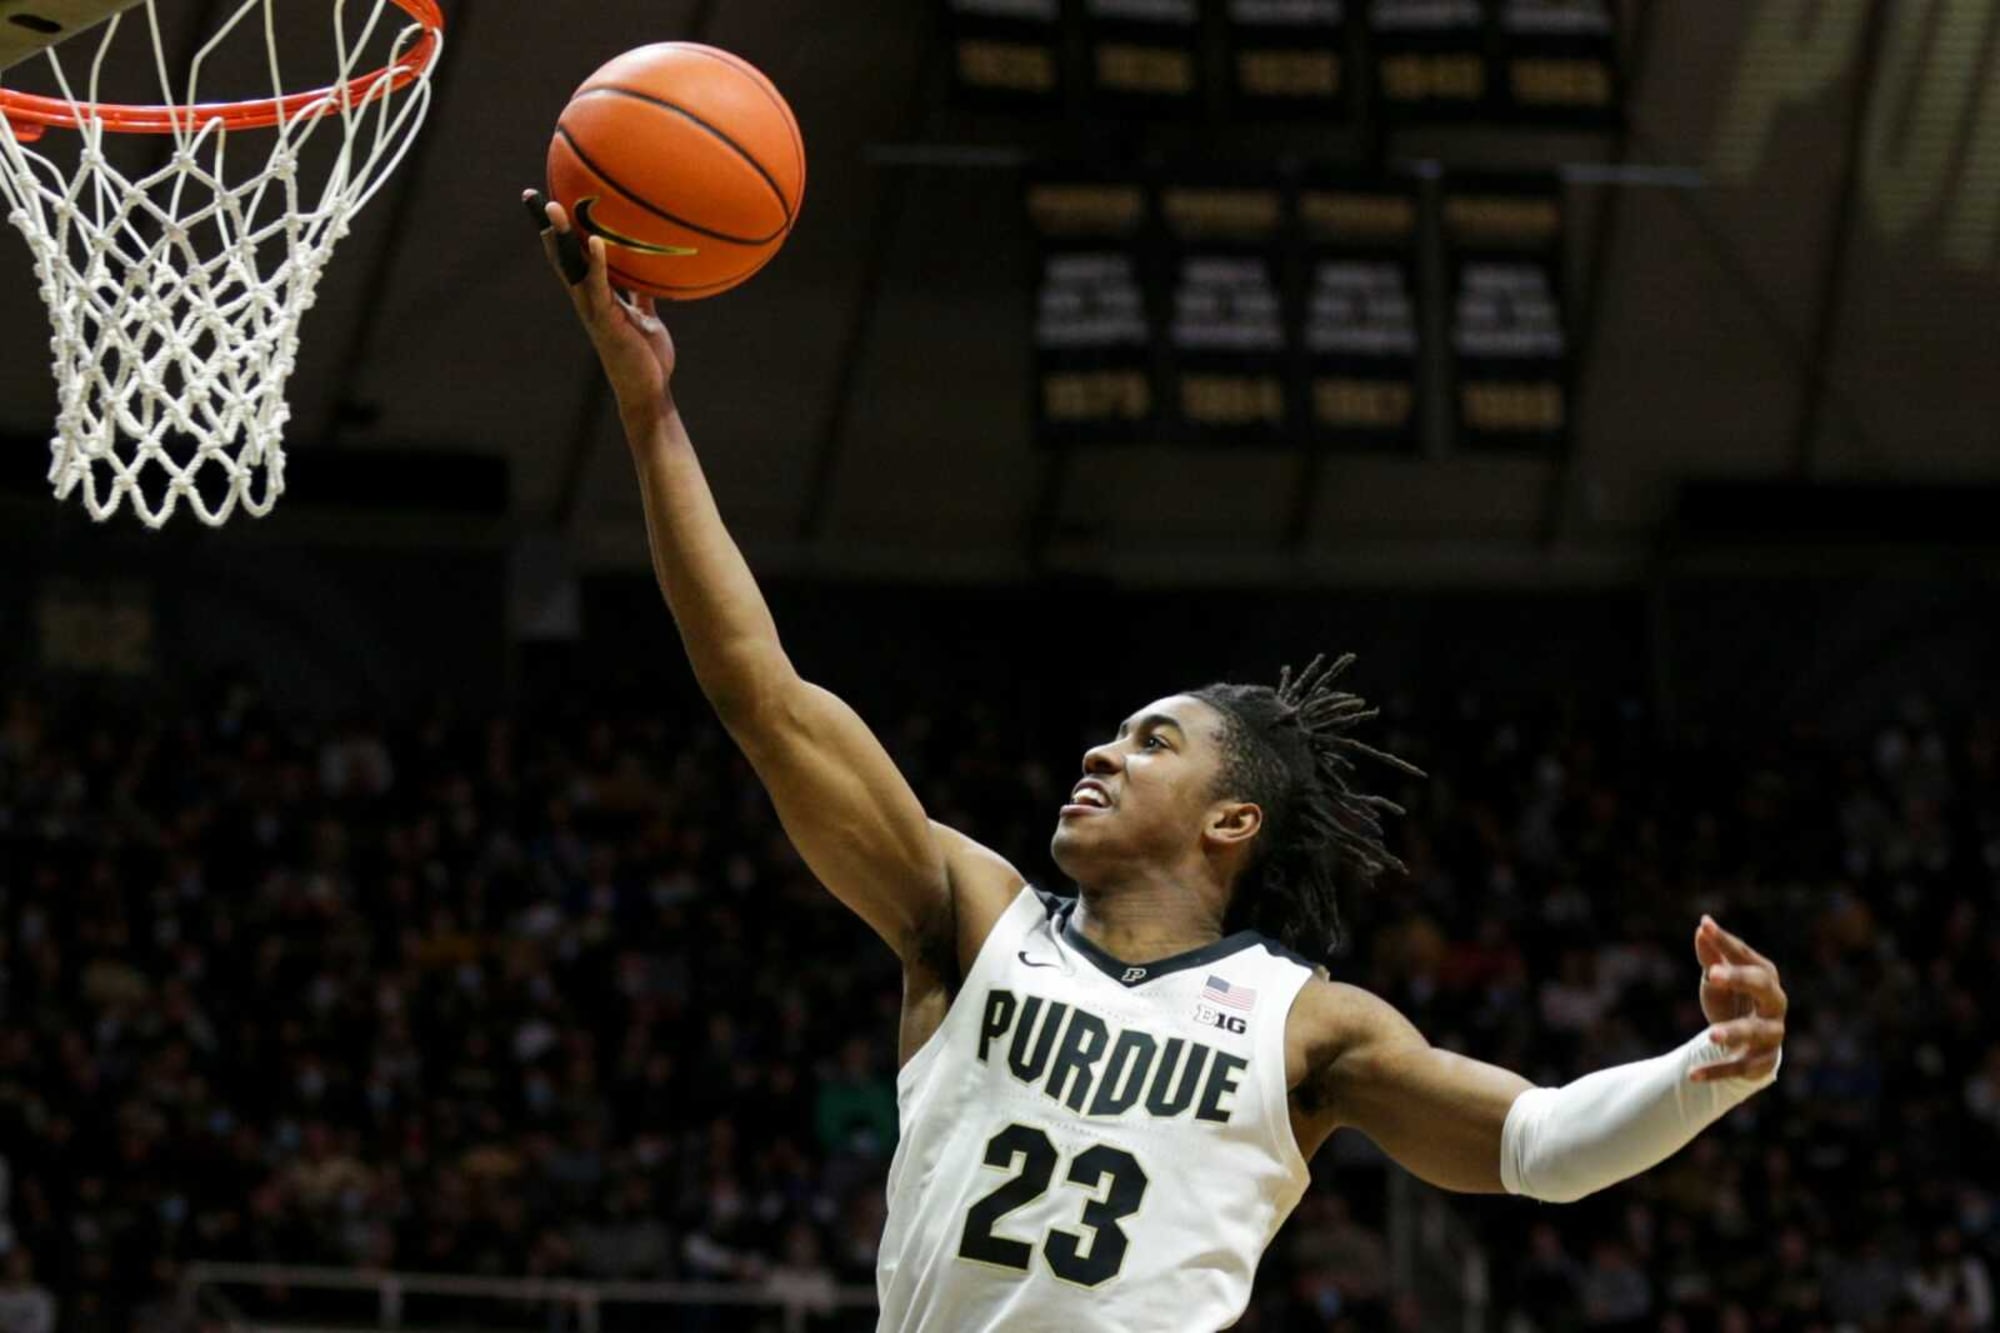 Wisconsin Game Today Wisconsin vs Purdue, Predictions, Odds, TV Channel and Live Stream for Basketball Game Jan